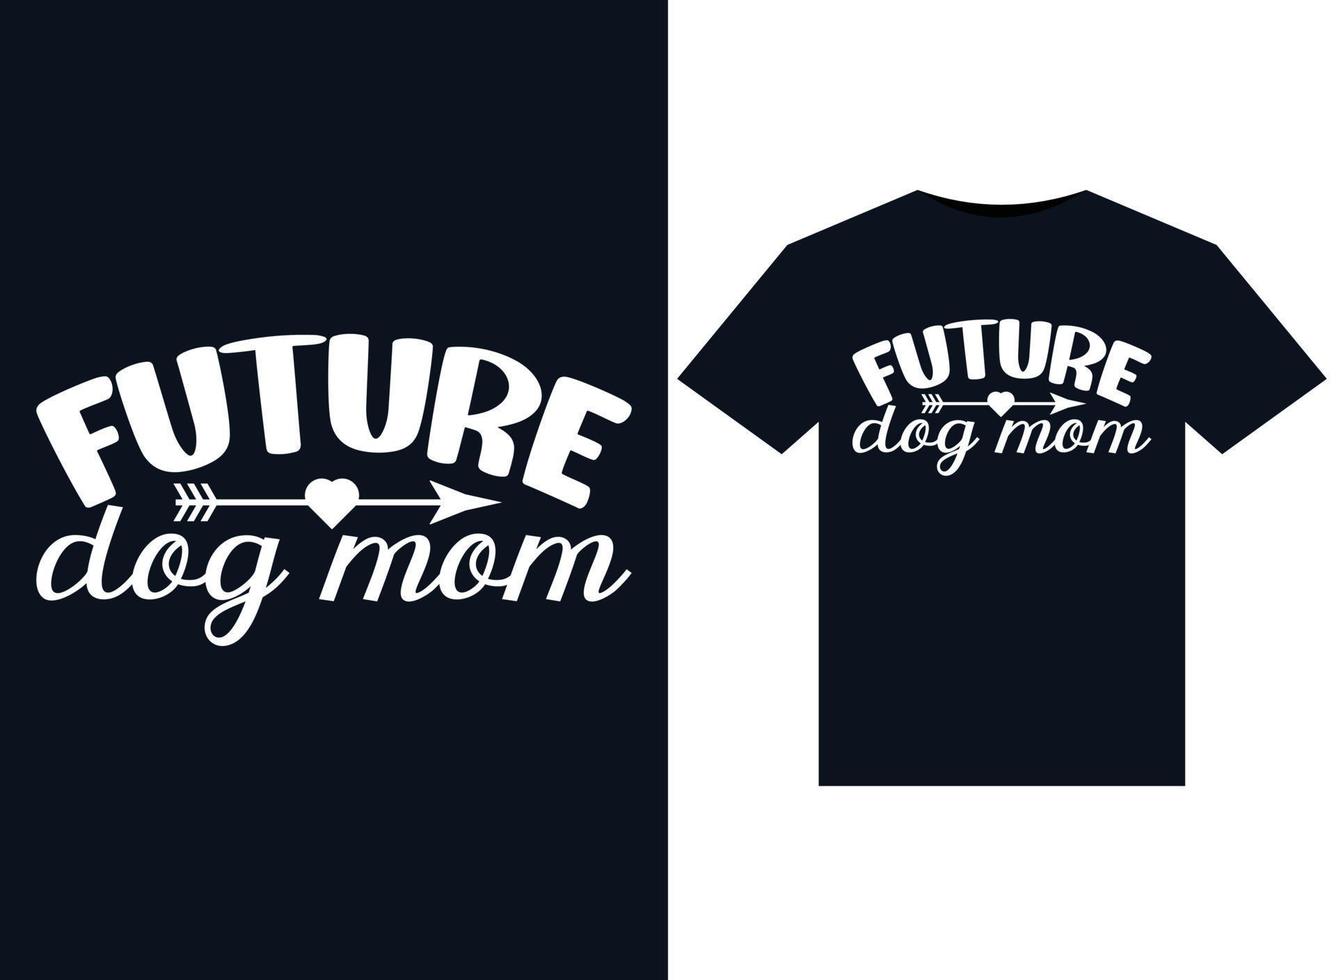 Future Dog Mom illustrations for print-ready T-Shirts design vector